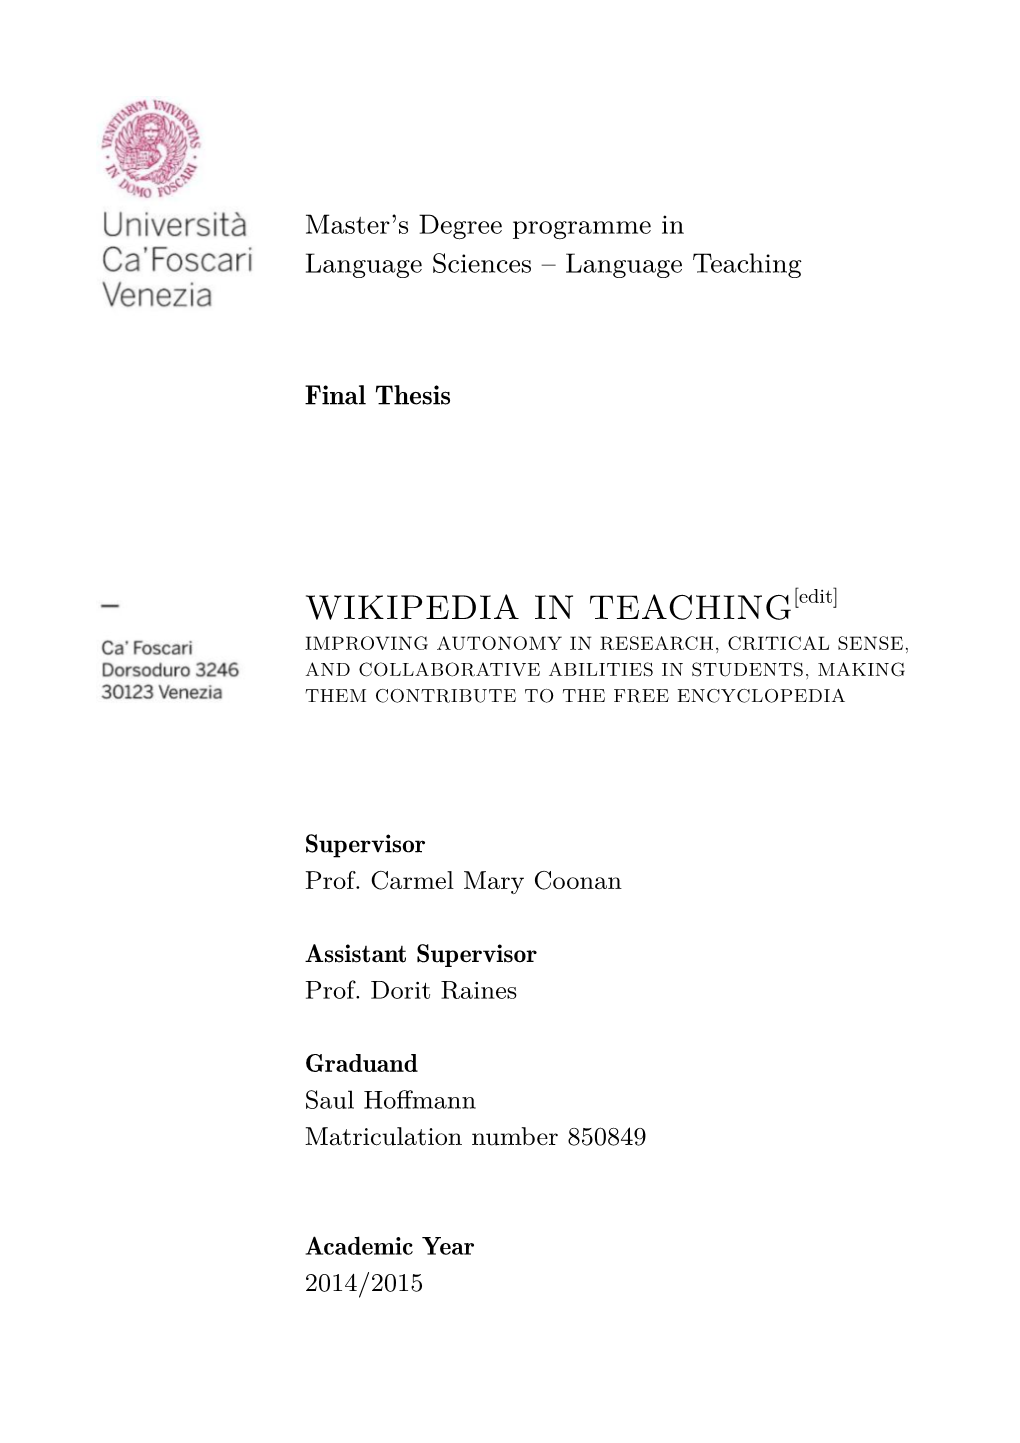 WIKIPEDIA in TEACHING[Edit] IMPROVING AUTONOMY in RESEARCH, CRITICAL SENSE, and COLLABORATIVE ABILITIES in STUDENTS, MAKING THEM CONTRIBUTE to the FREE ENCYCLOPEDIA